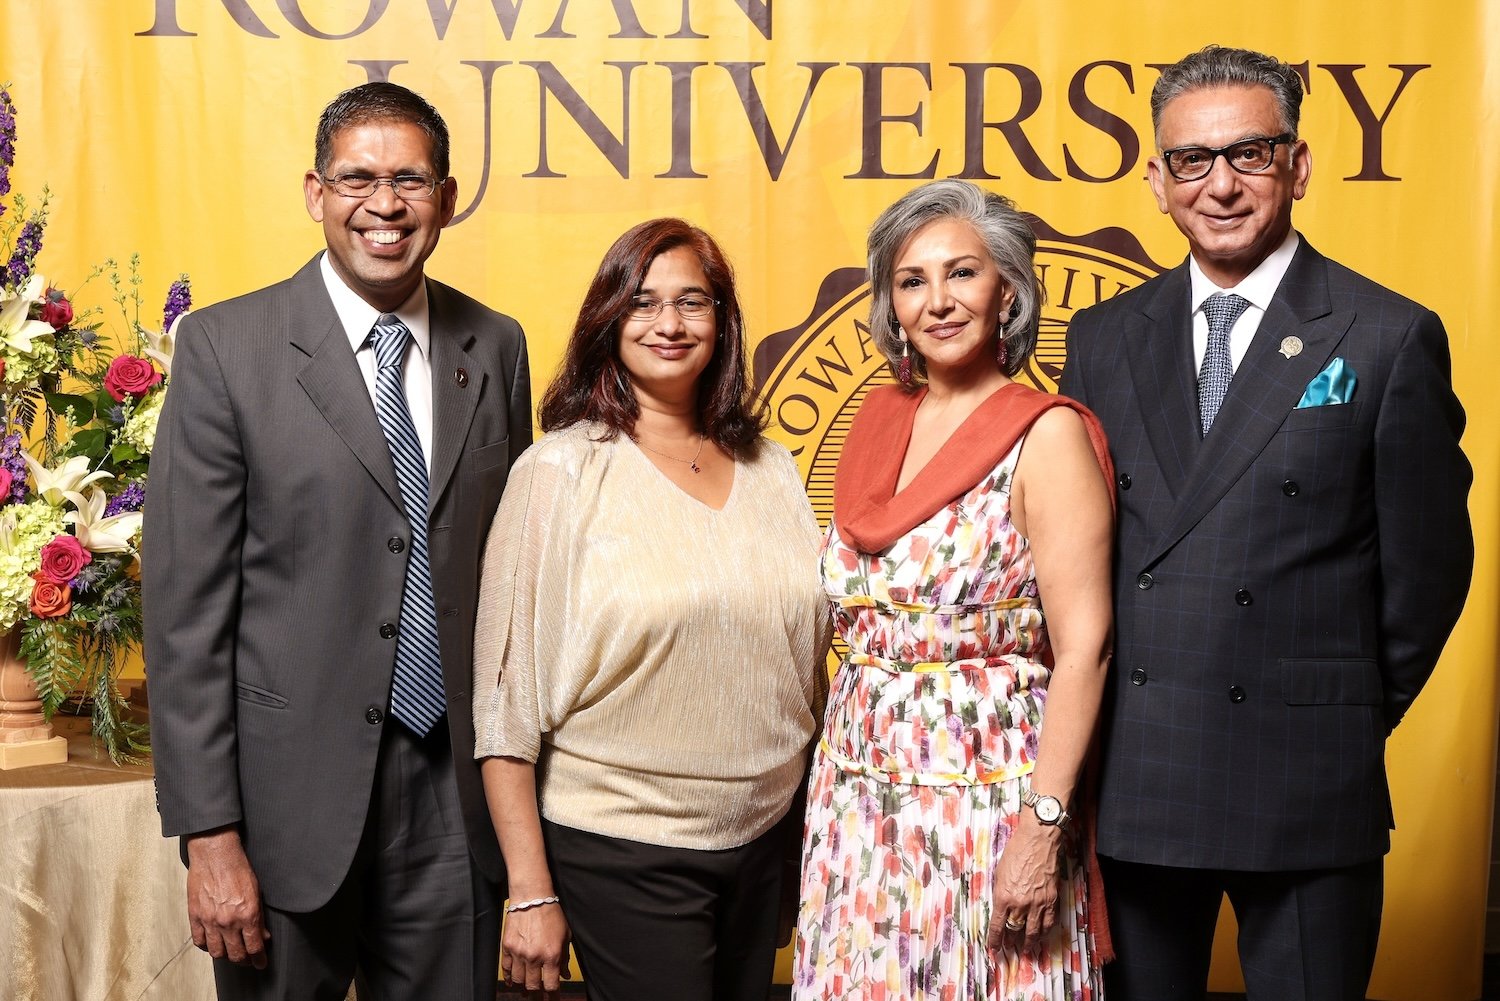 A photo of President Houshmand and three others at a reception.